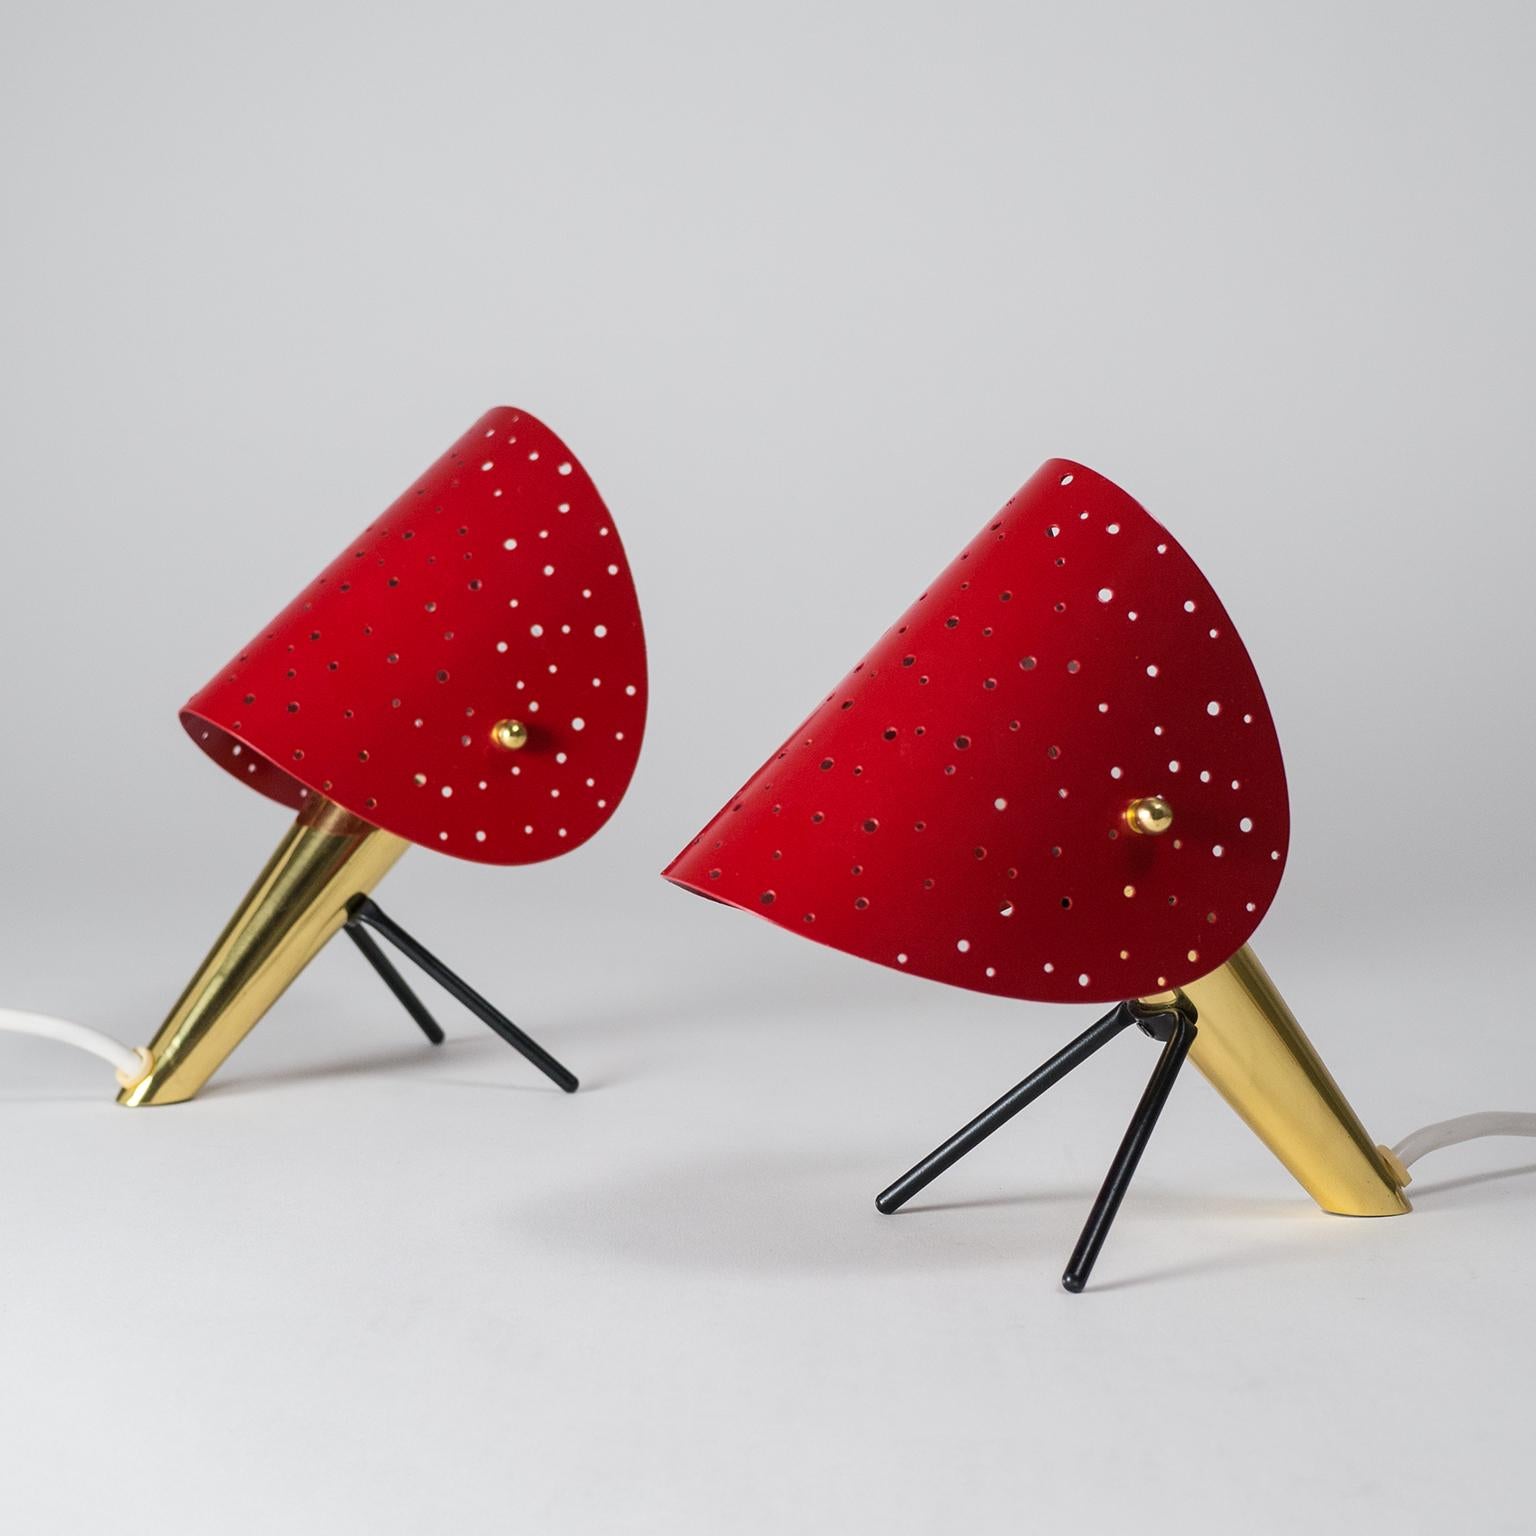 Lovely pair of Ernest Igl table lamps from the 1950s. Brass body with V-shaped lacquered metal legs and lacquered metal shades with pierced holes of varying size creating a magnificent light effect. Each lamp one original brass E14 socket.